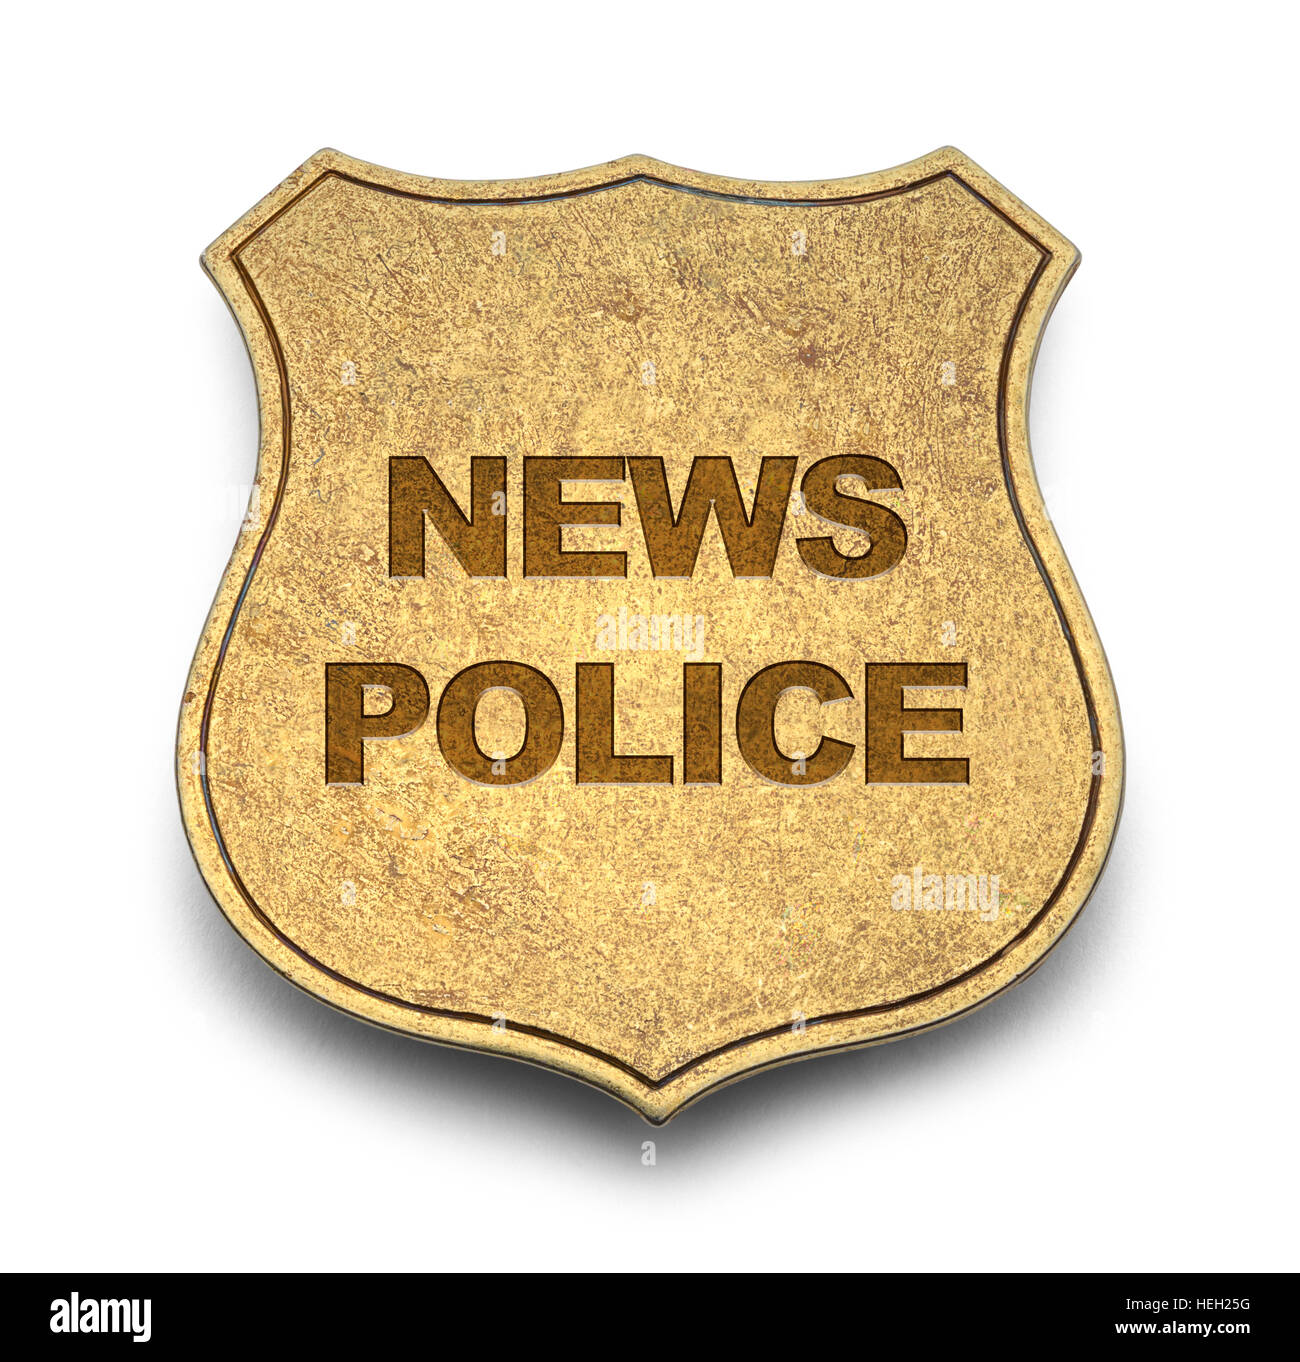 News Police Shield Badge Isolated on White Background. Stock Photo